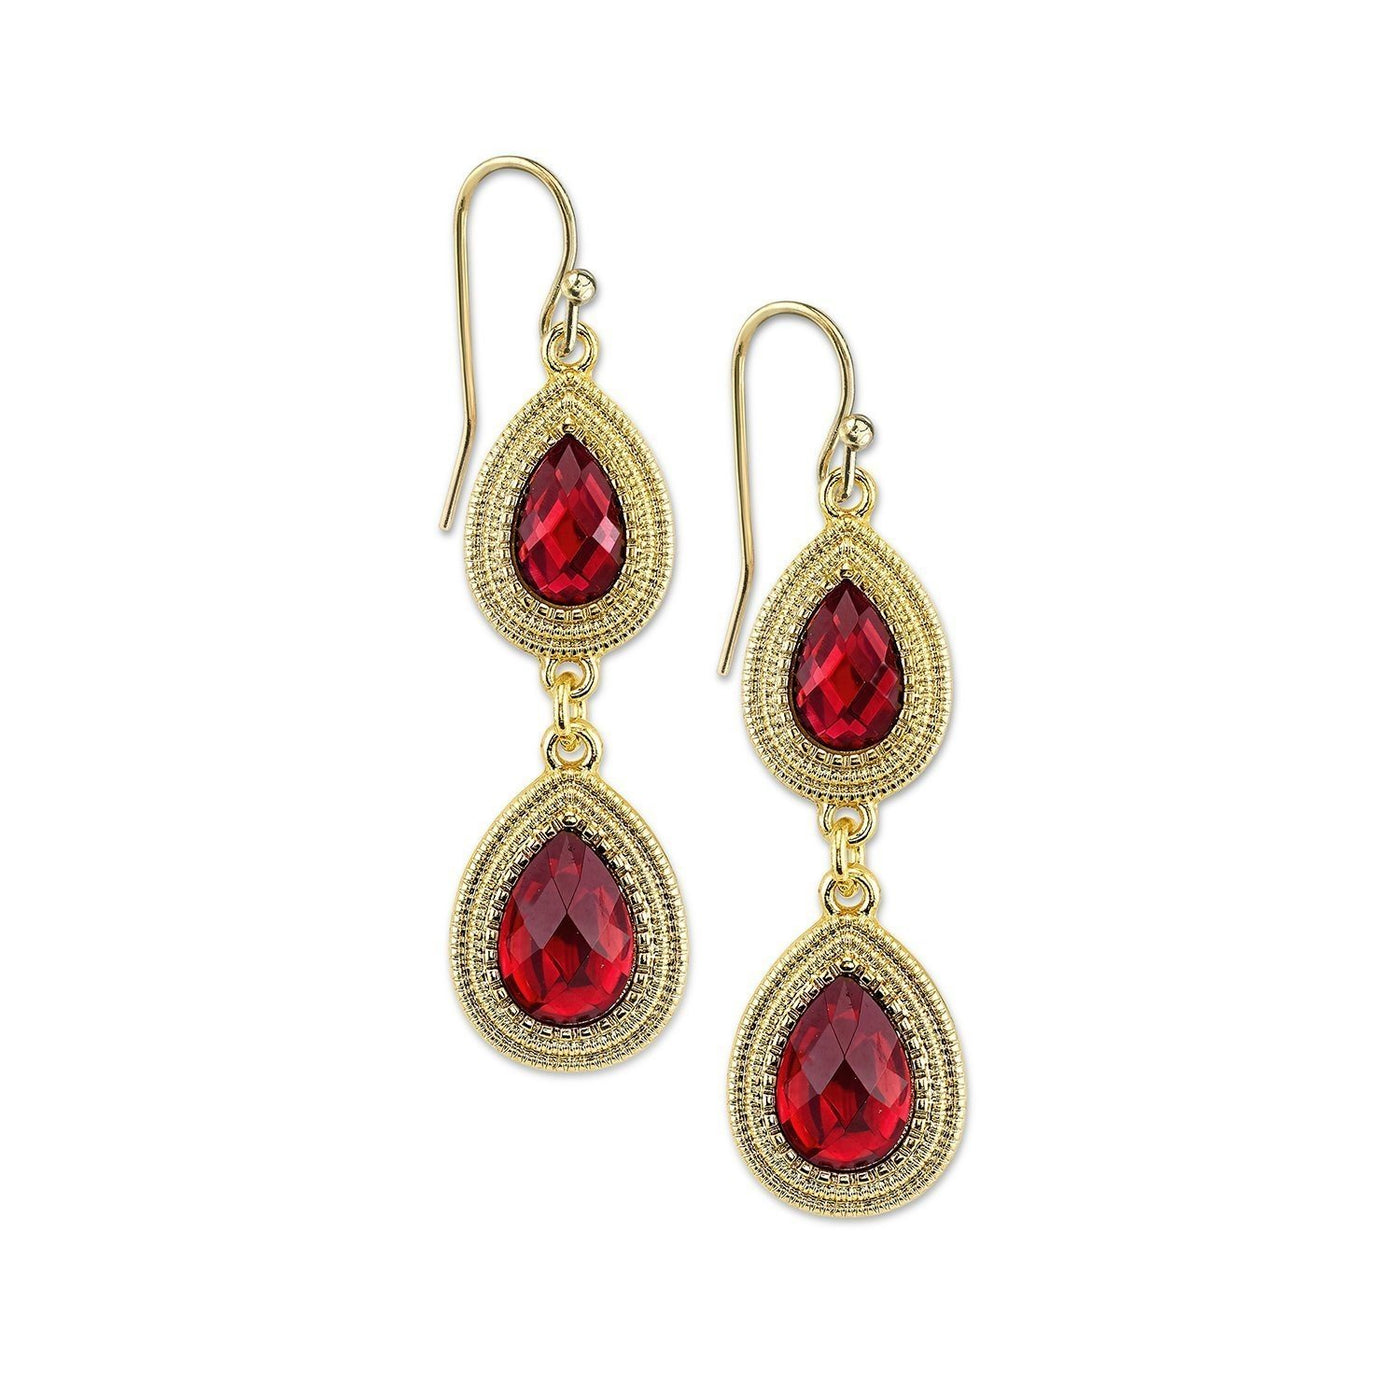 Vintage Inspired Siam Red Crystals Drop Earrings - SOLD OUT